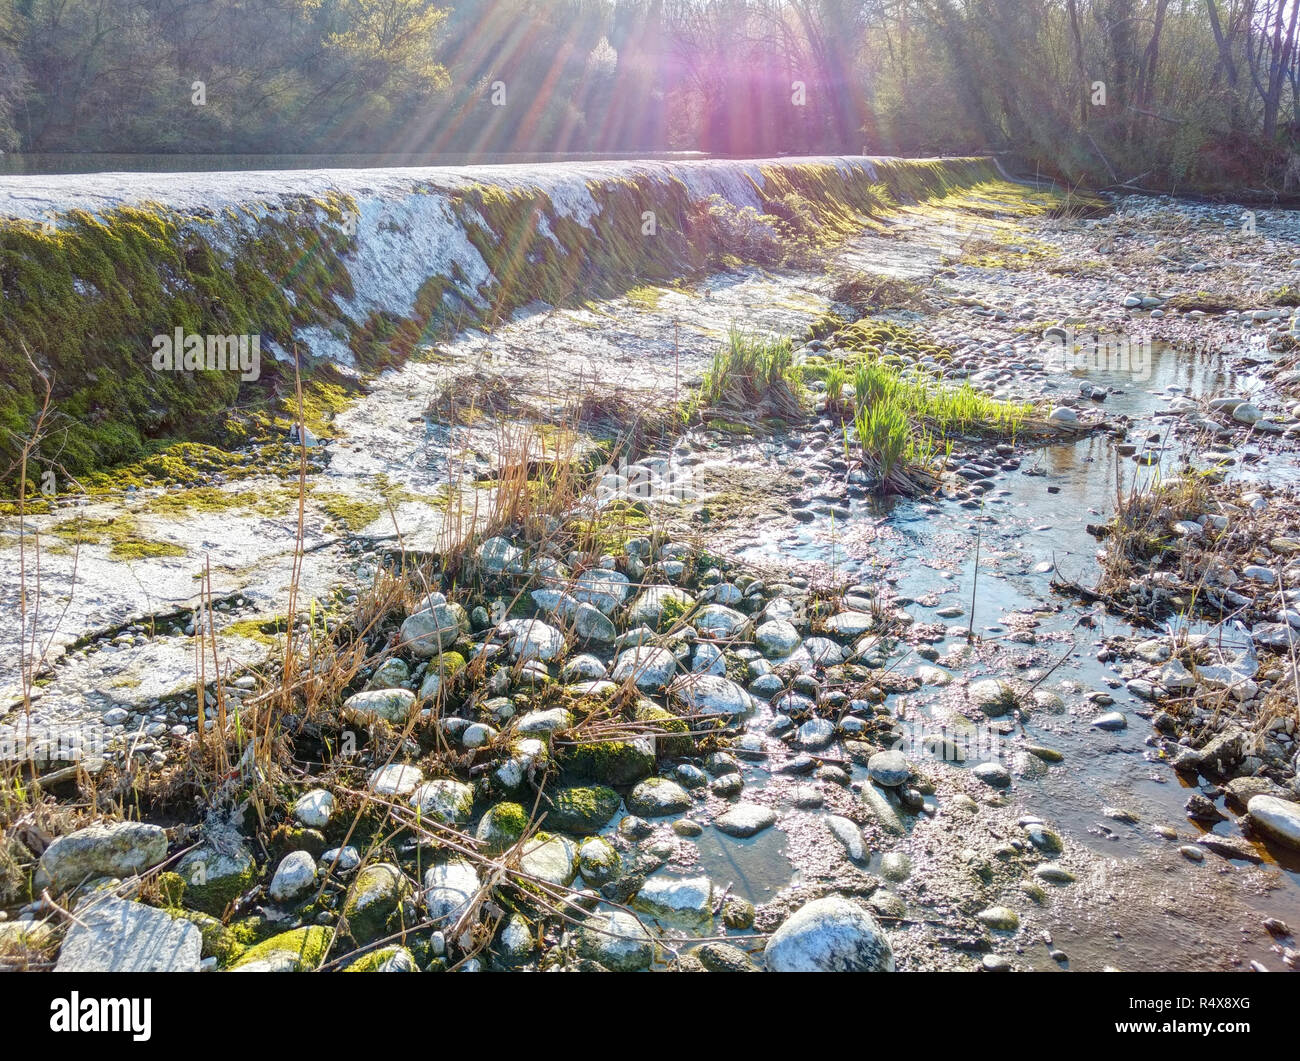 The Naviglio Langosco artifical canal dyke during spring at sunser, with moss, pebbles and puddles in backlight, in Ticino reserve, Galliate, Italy Stock Photo